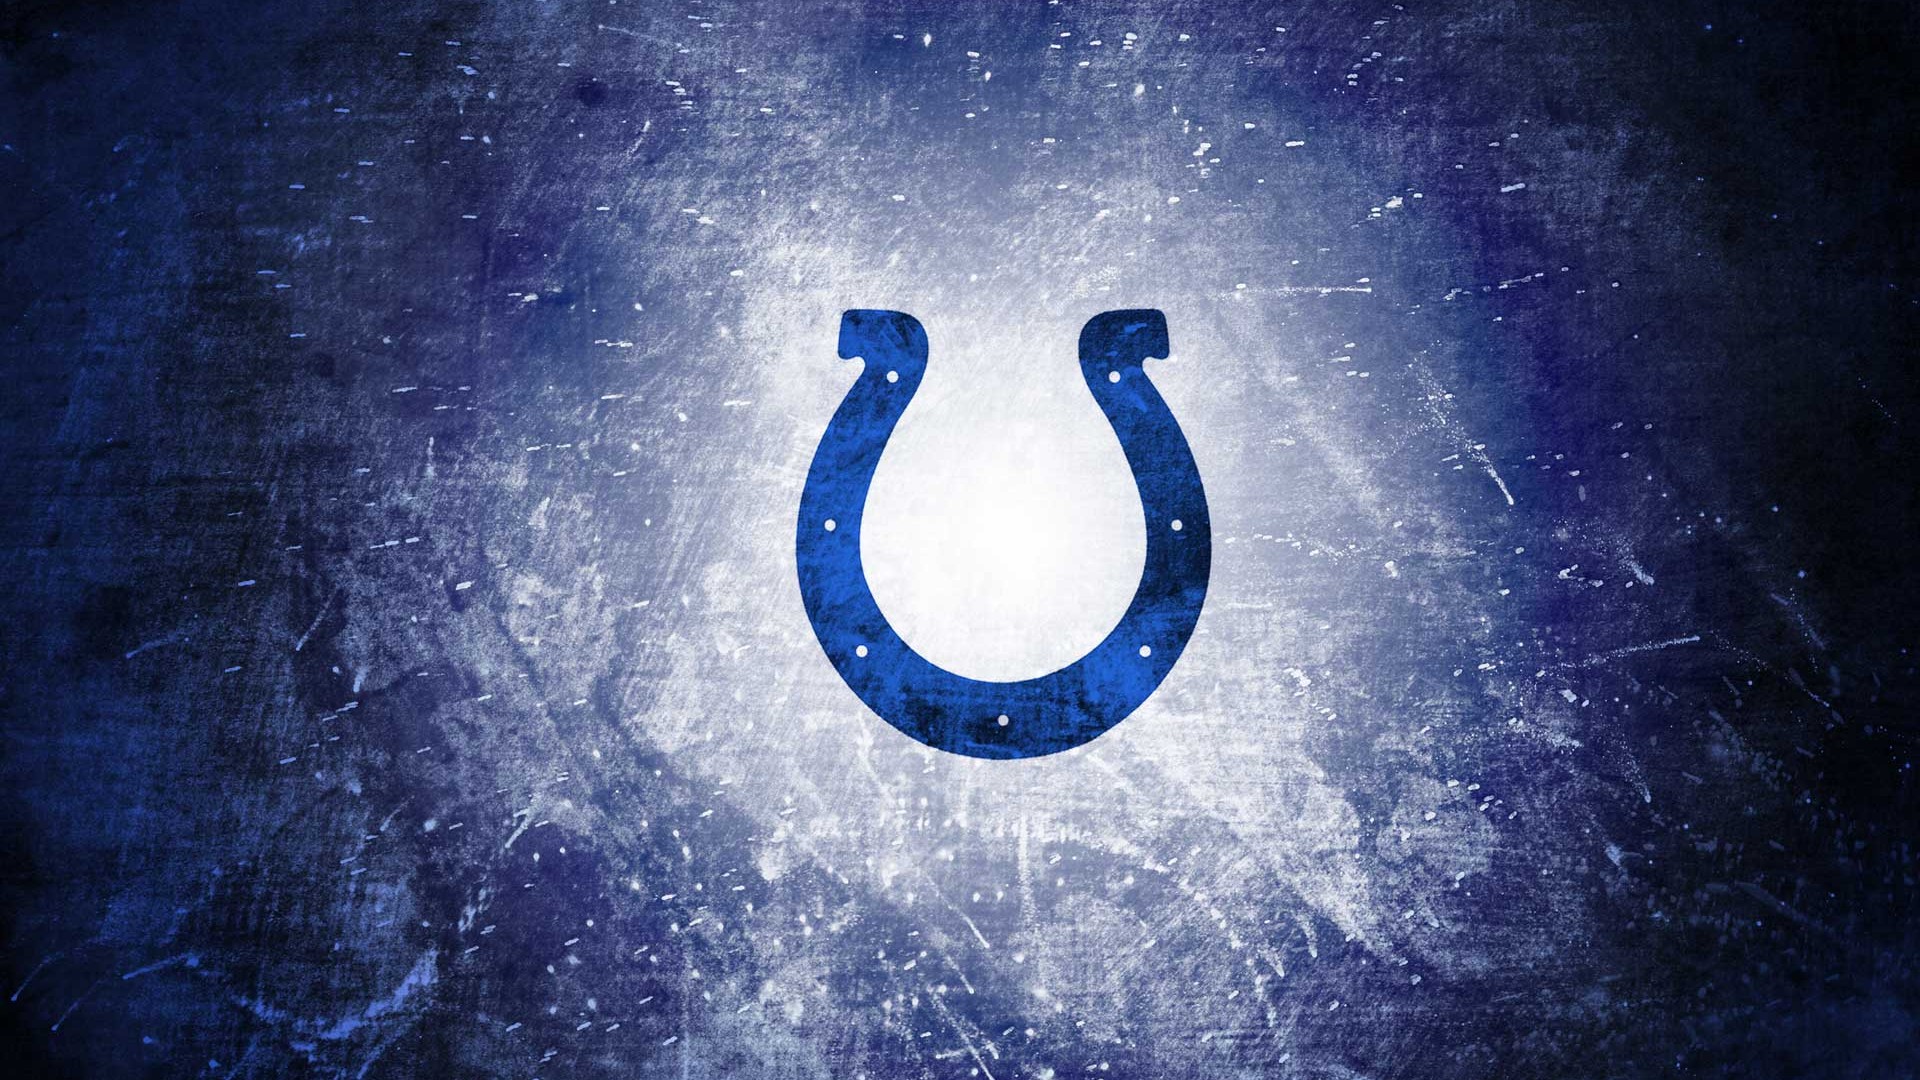 Indianapolis Colts Wallpaper For Mac Backgrounds With Resolution 1920X1080